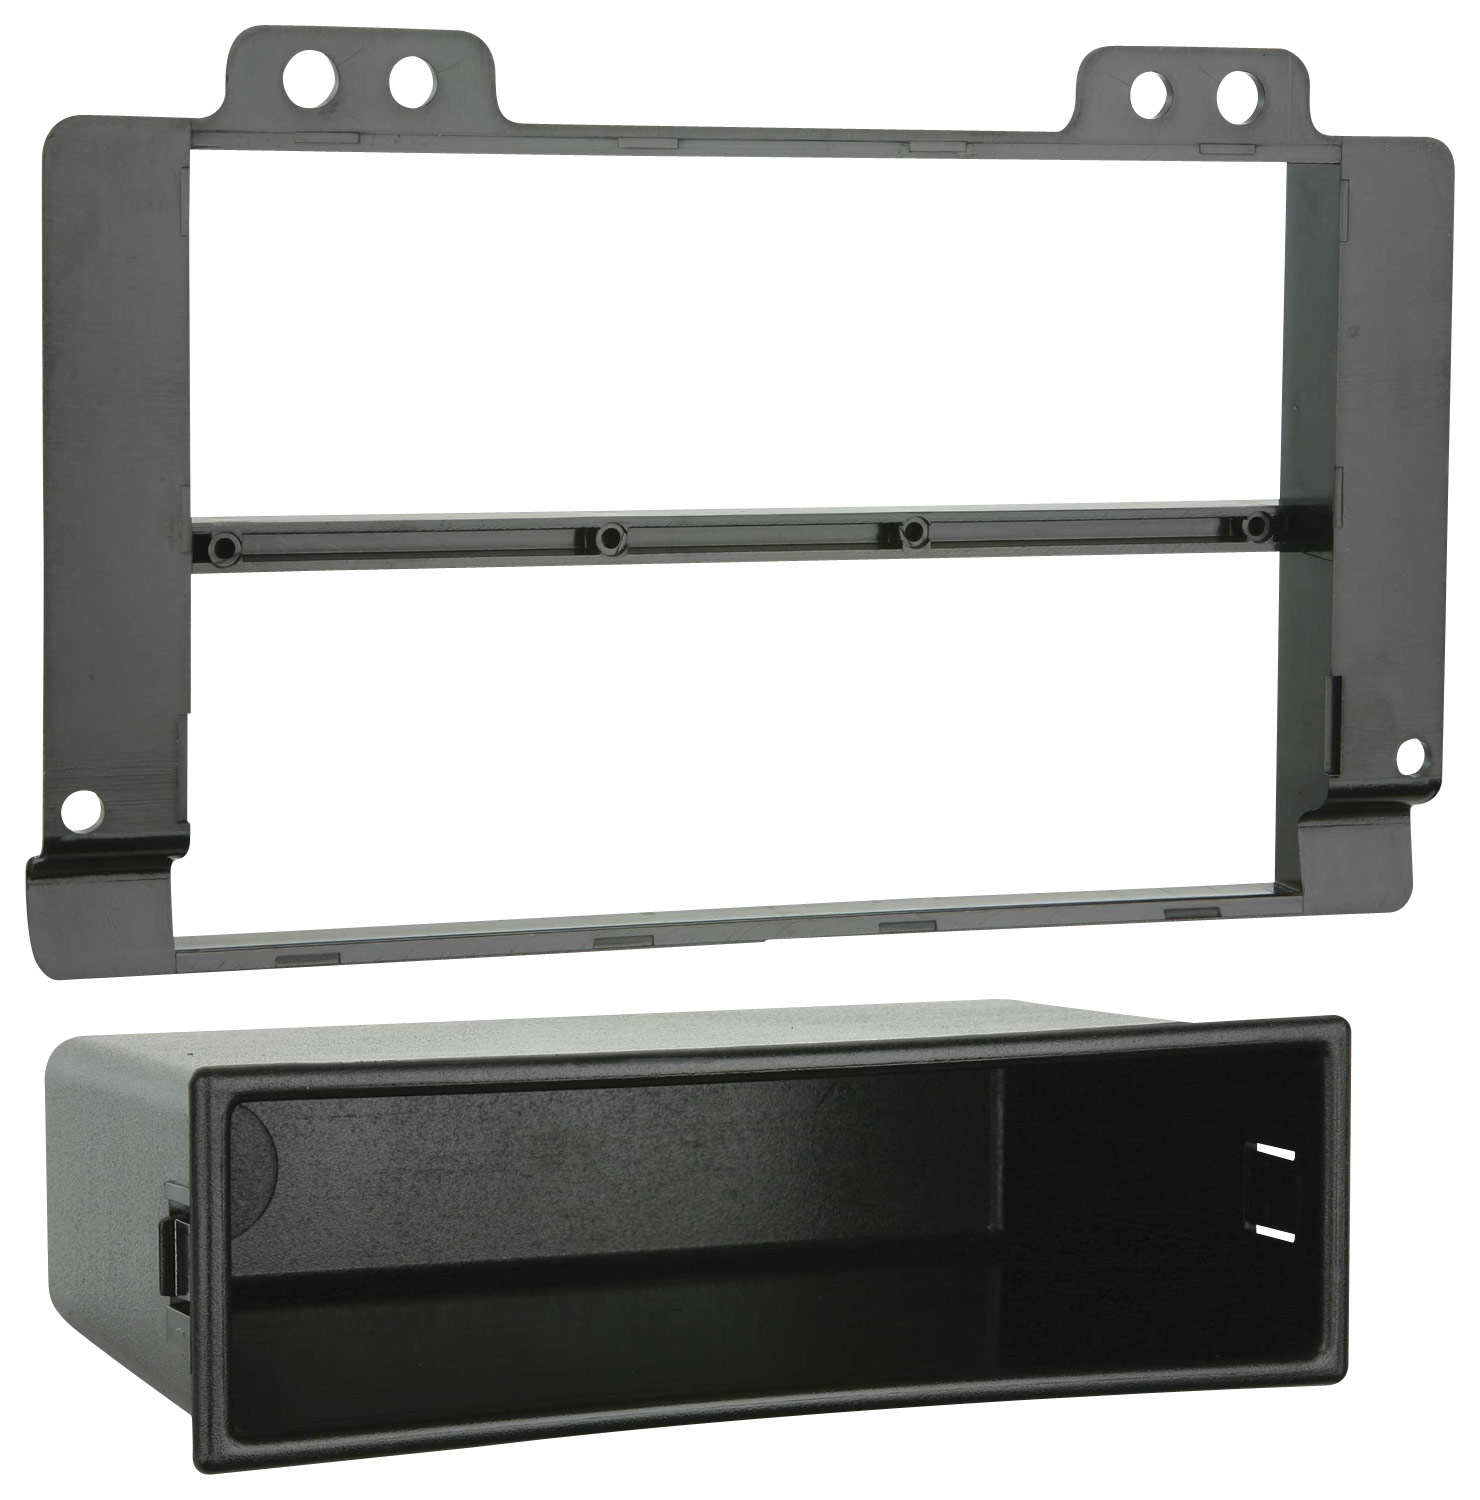 Metra - Dash Kit for Select 2004-2006 Land Rover Freelander - Black was $49.99 now $37.49 (25.0% off)